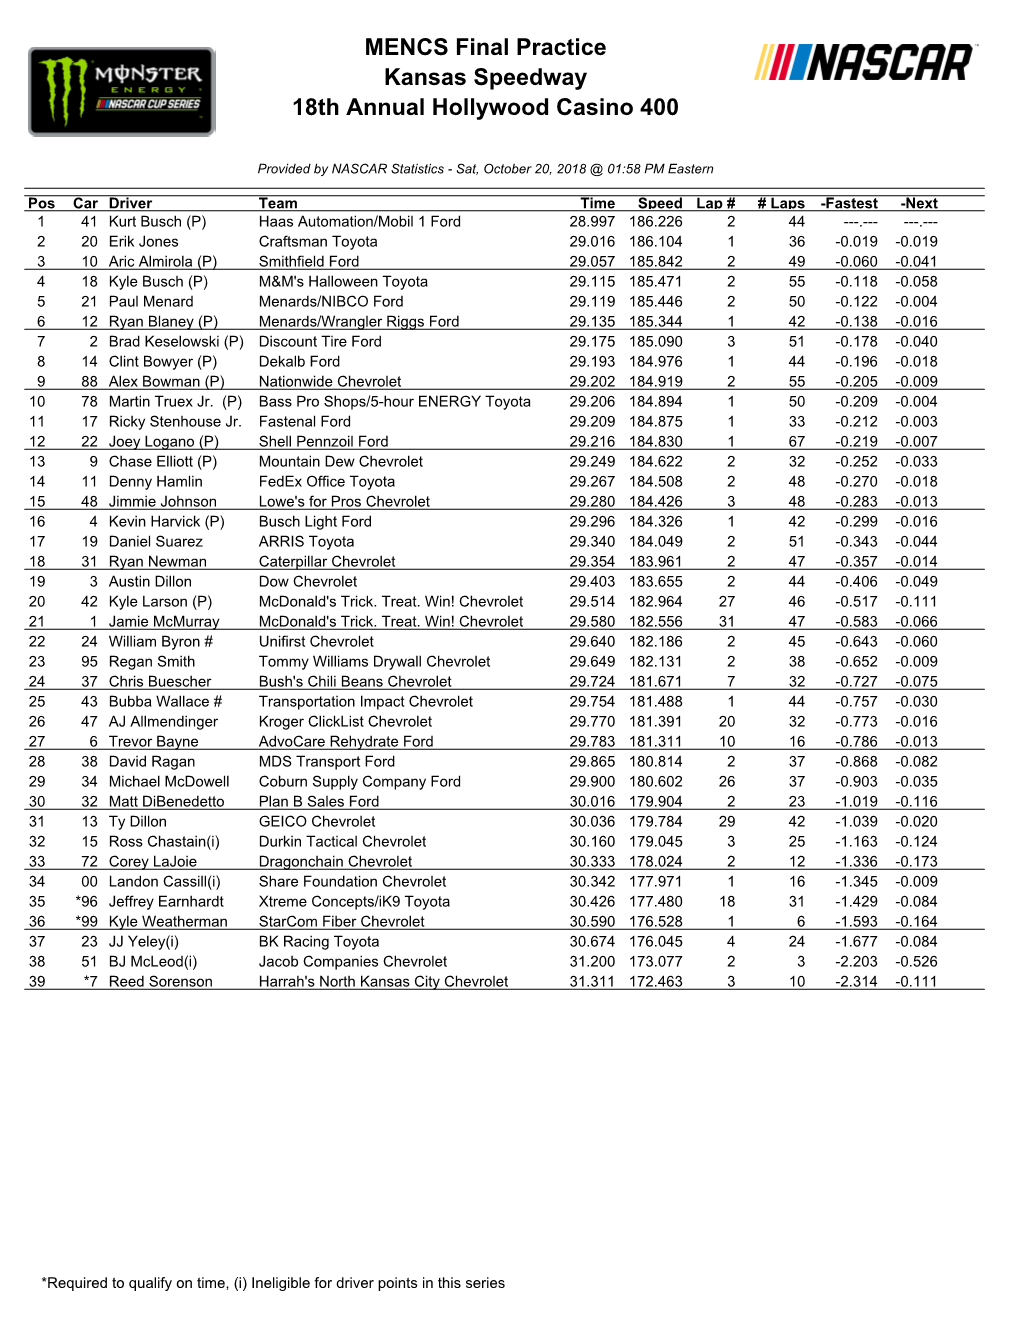 MENCS Final Practice Kansas Speedway 18Th Annual Hollywood Casino 400